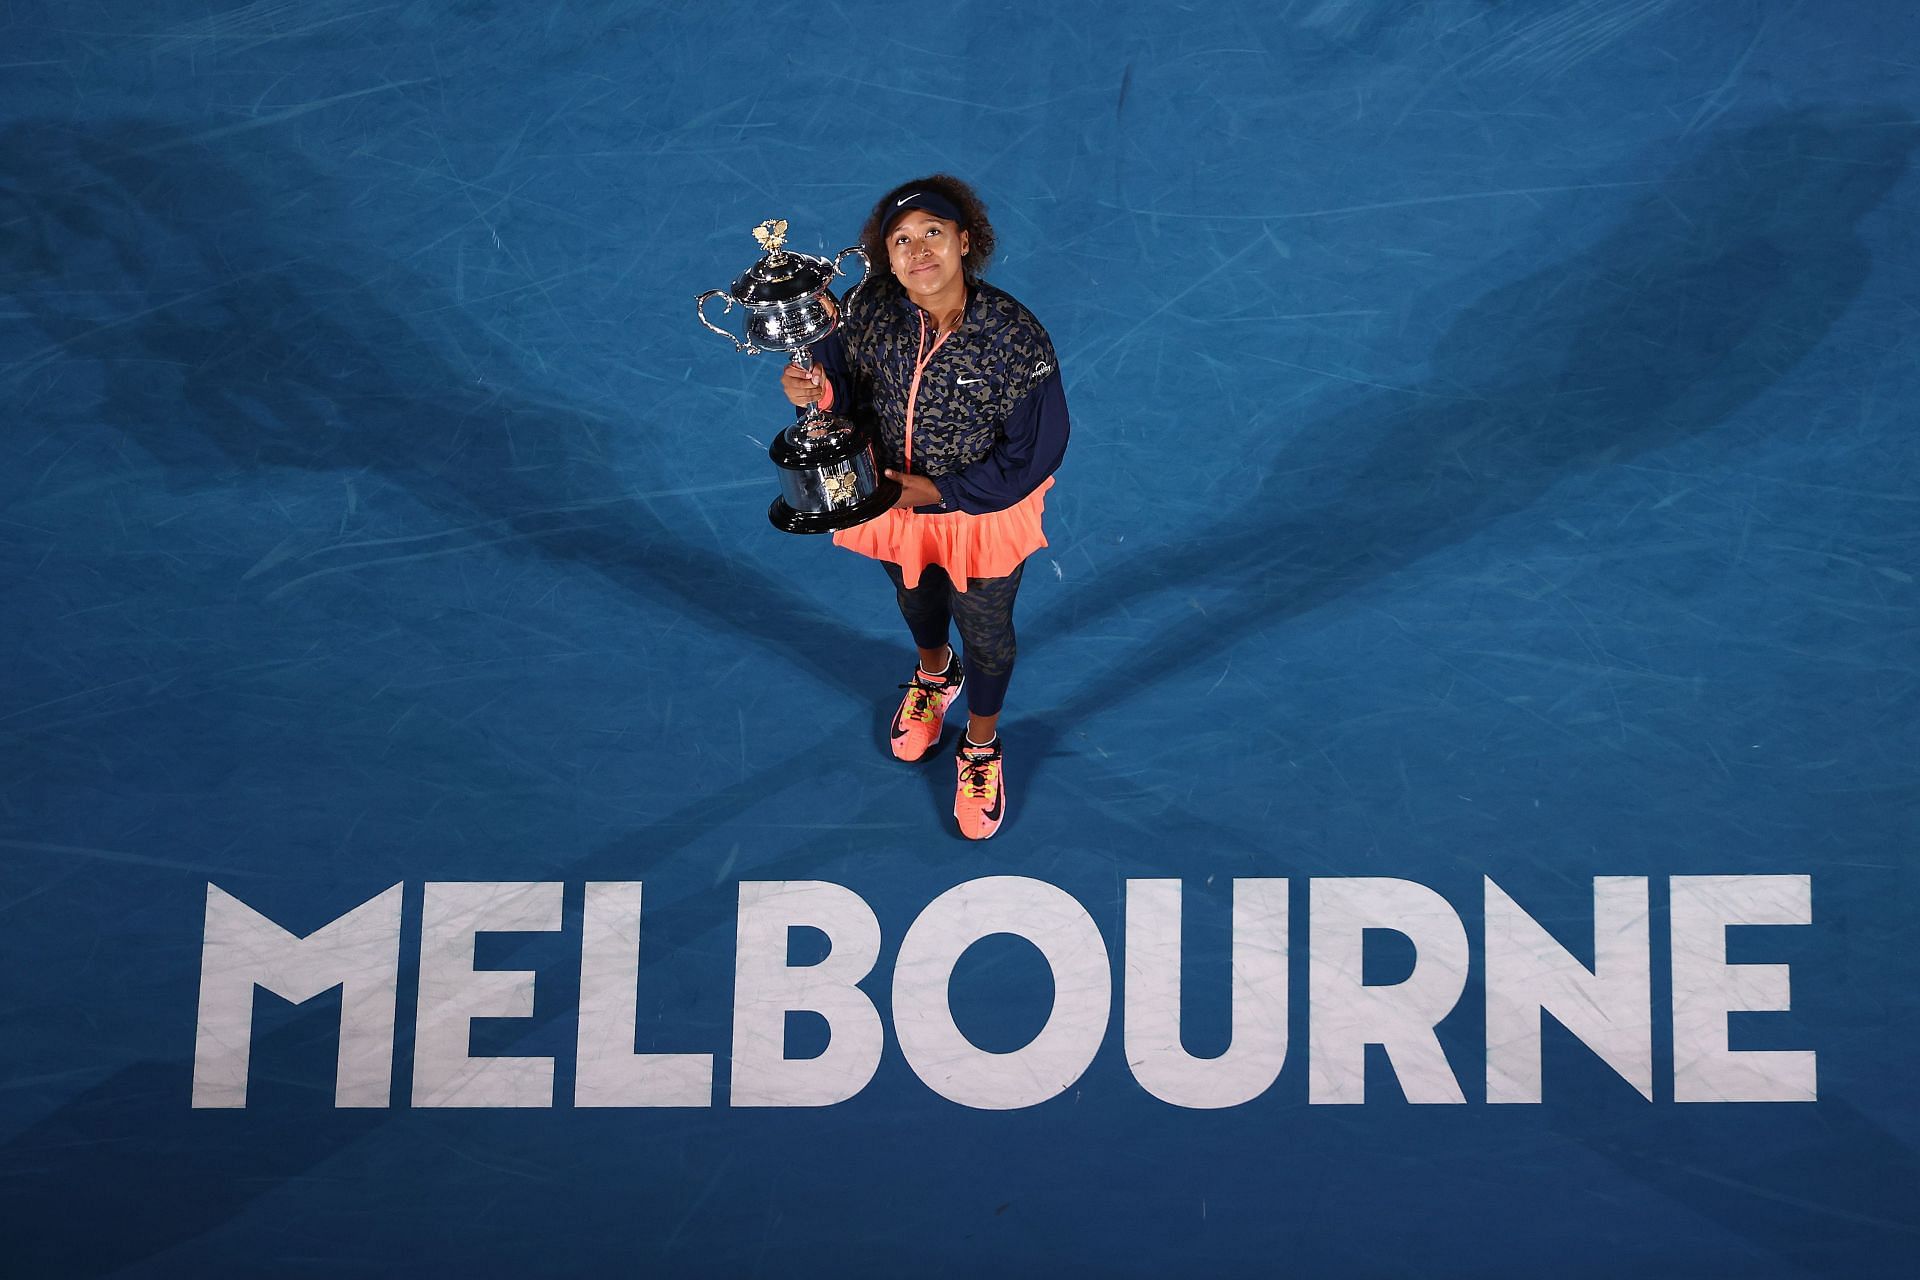 Naomi Osaka will try and defend her Australian Open title